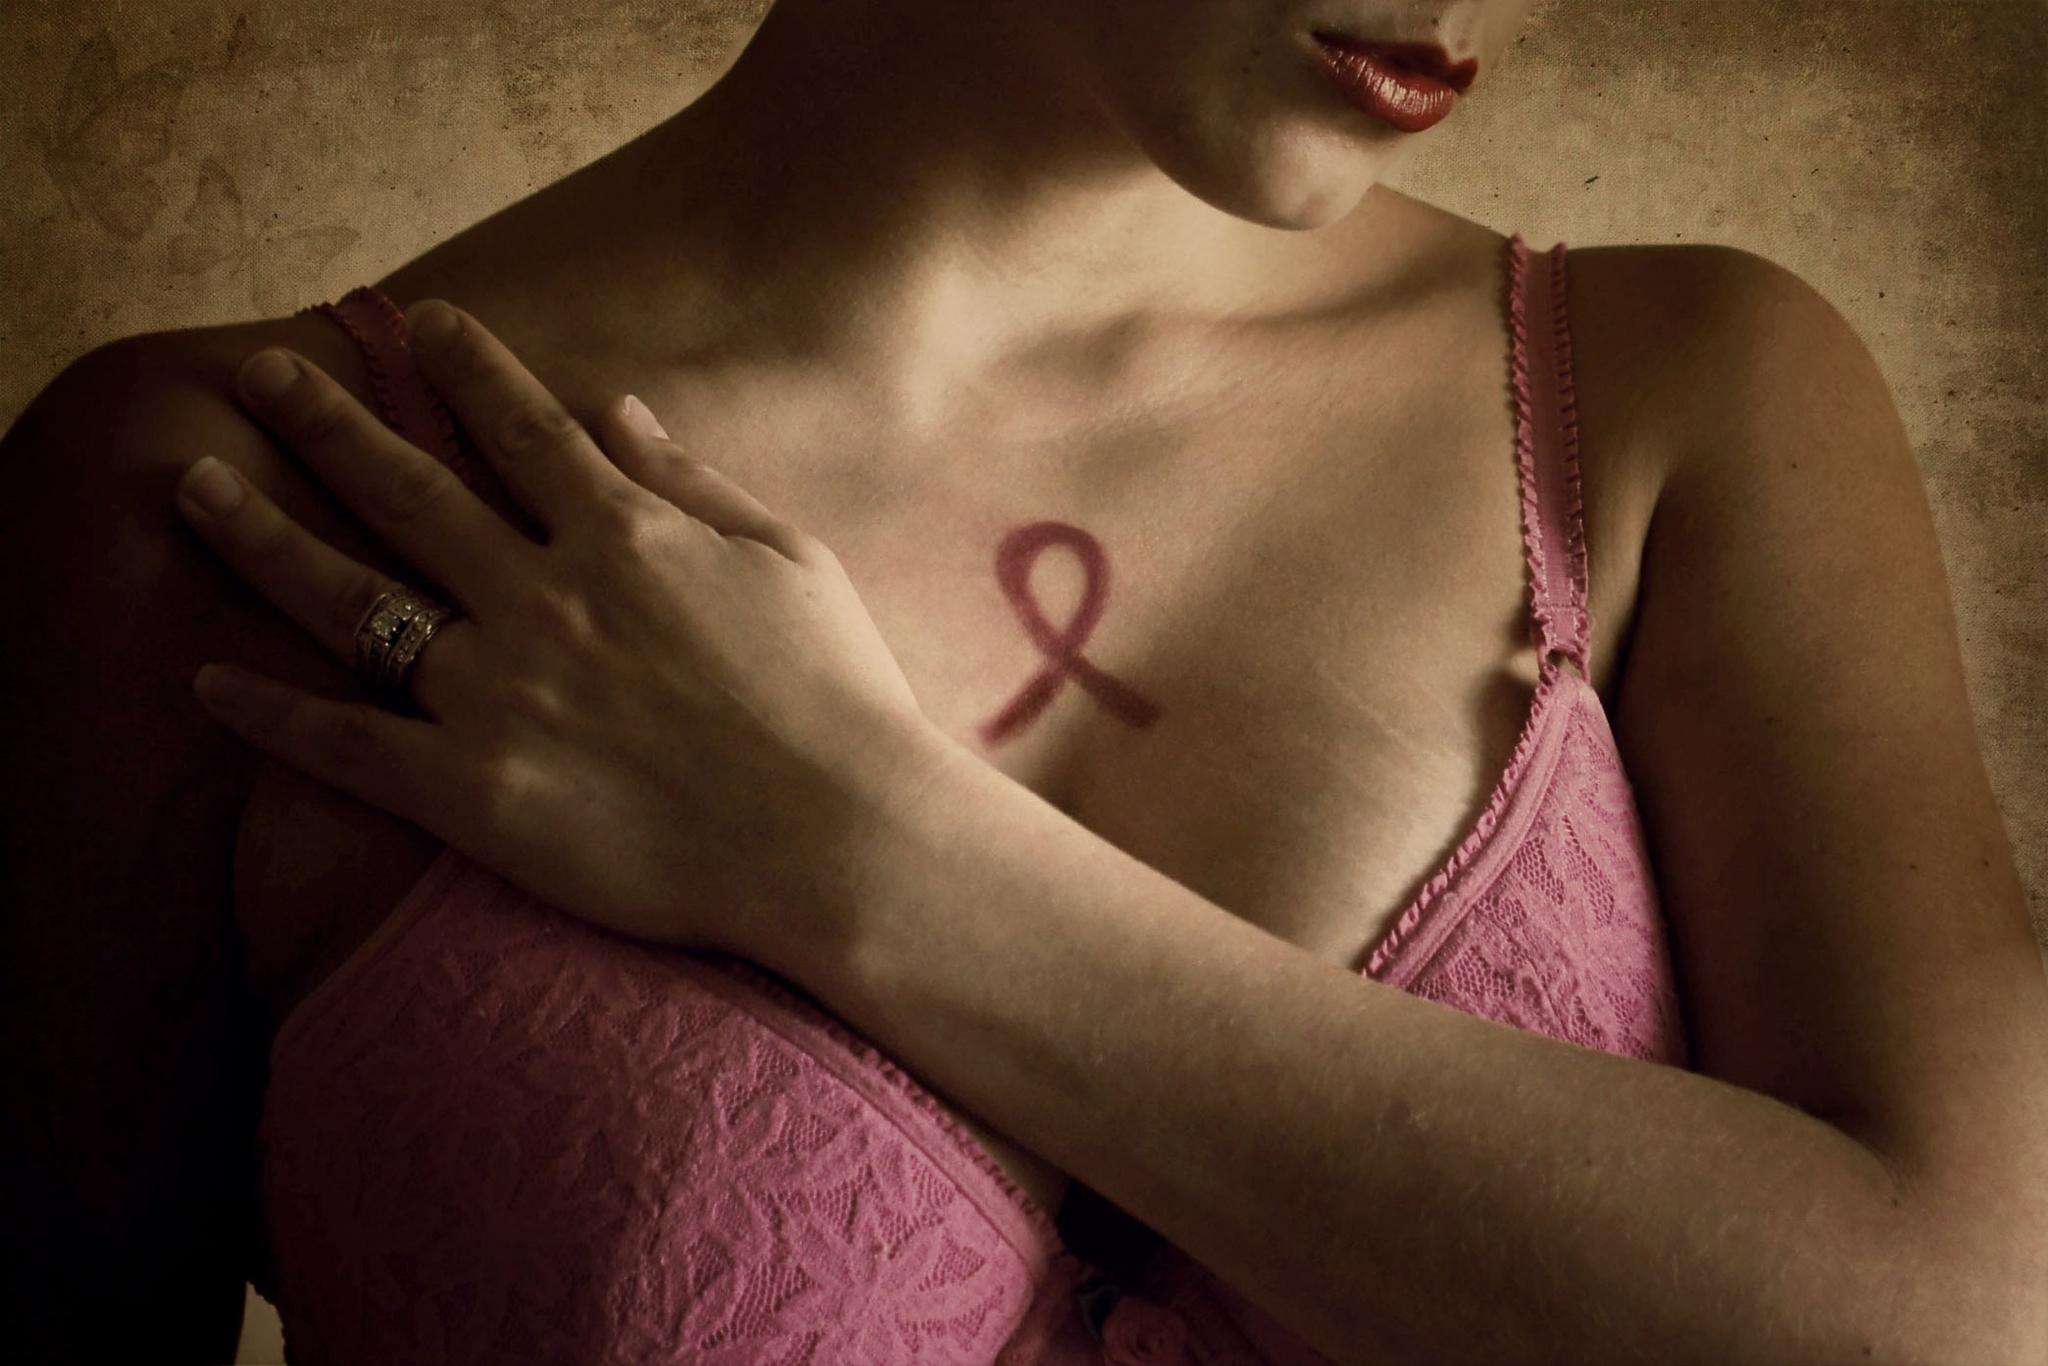 October Is Breast Cancer Awareness month, Here's How You Can Show Your Support